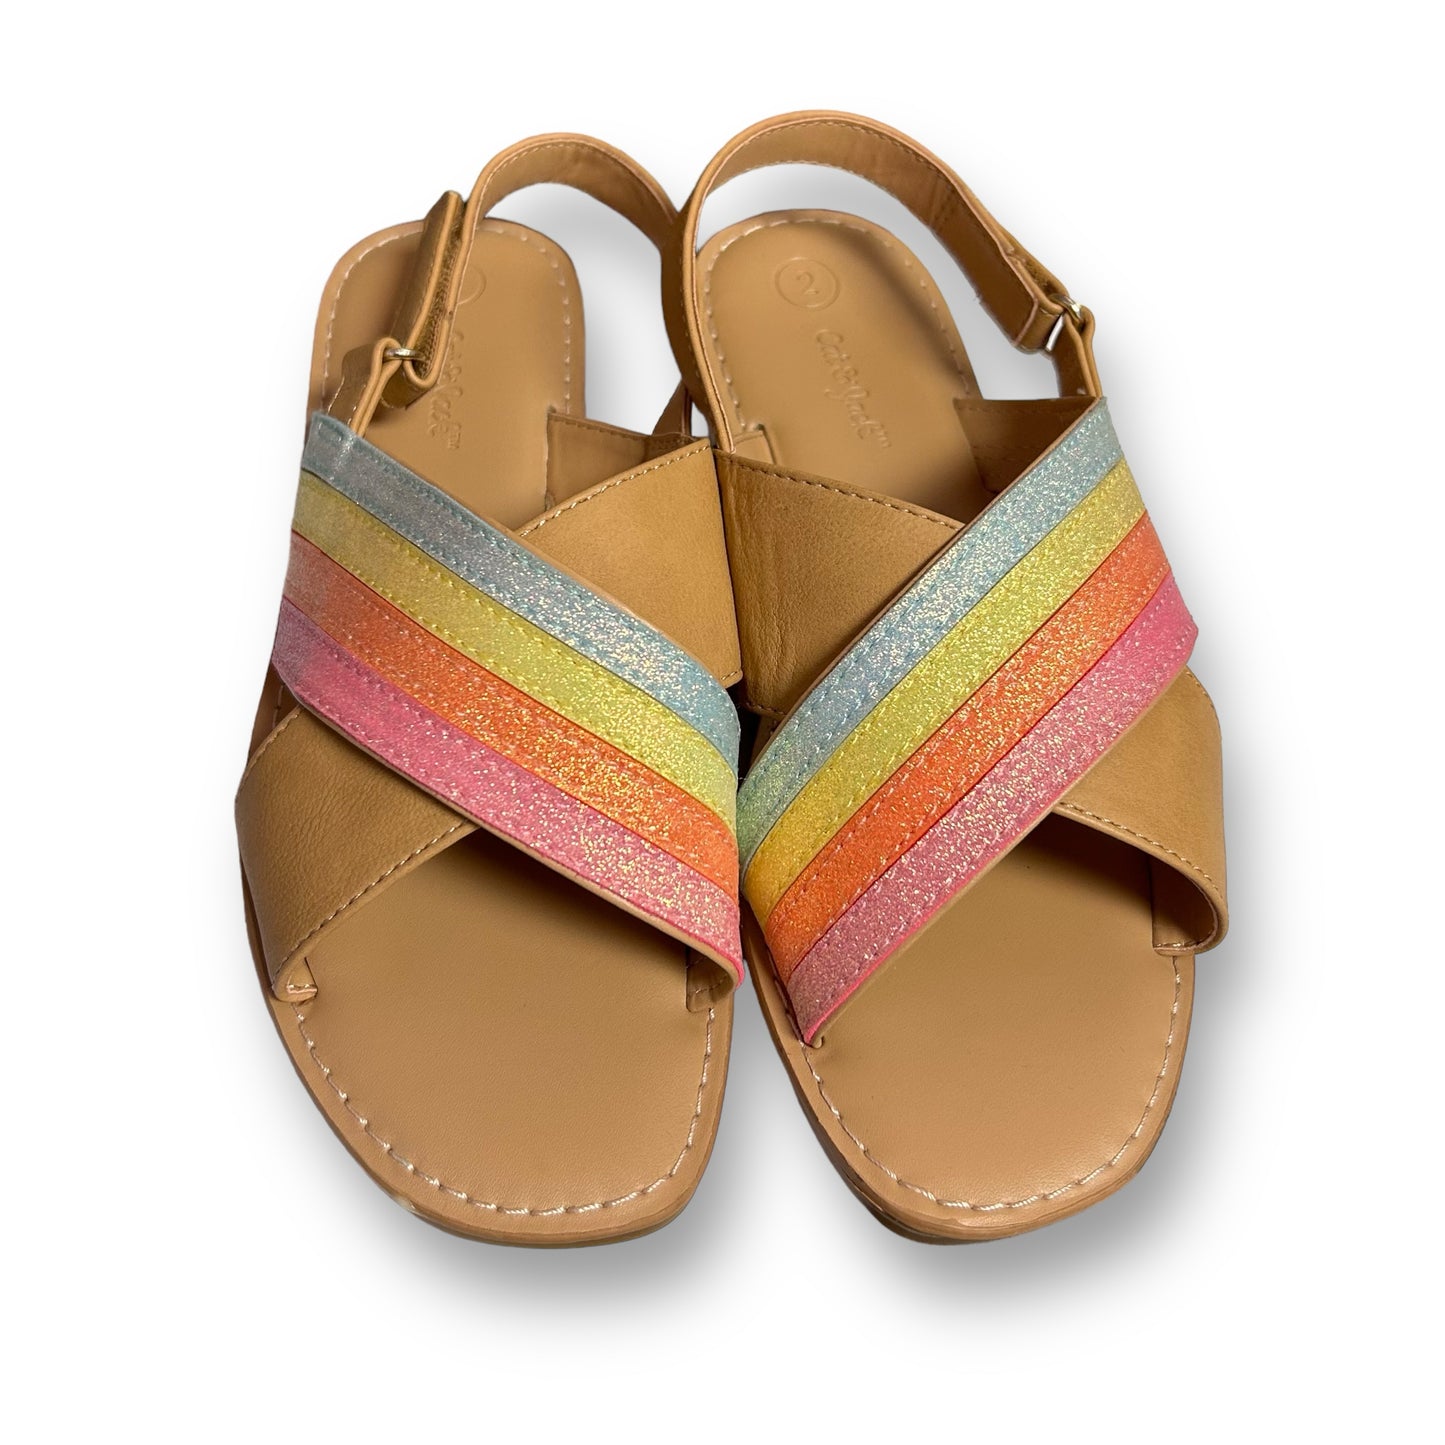 Cat & Jack Youth Girl Size 2 Rainbow Shimmer Leather-Like Flat Sandals